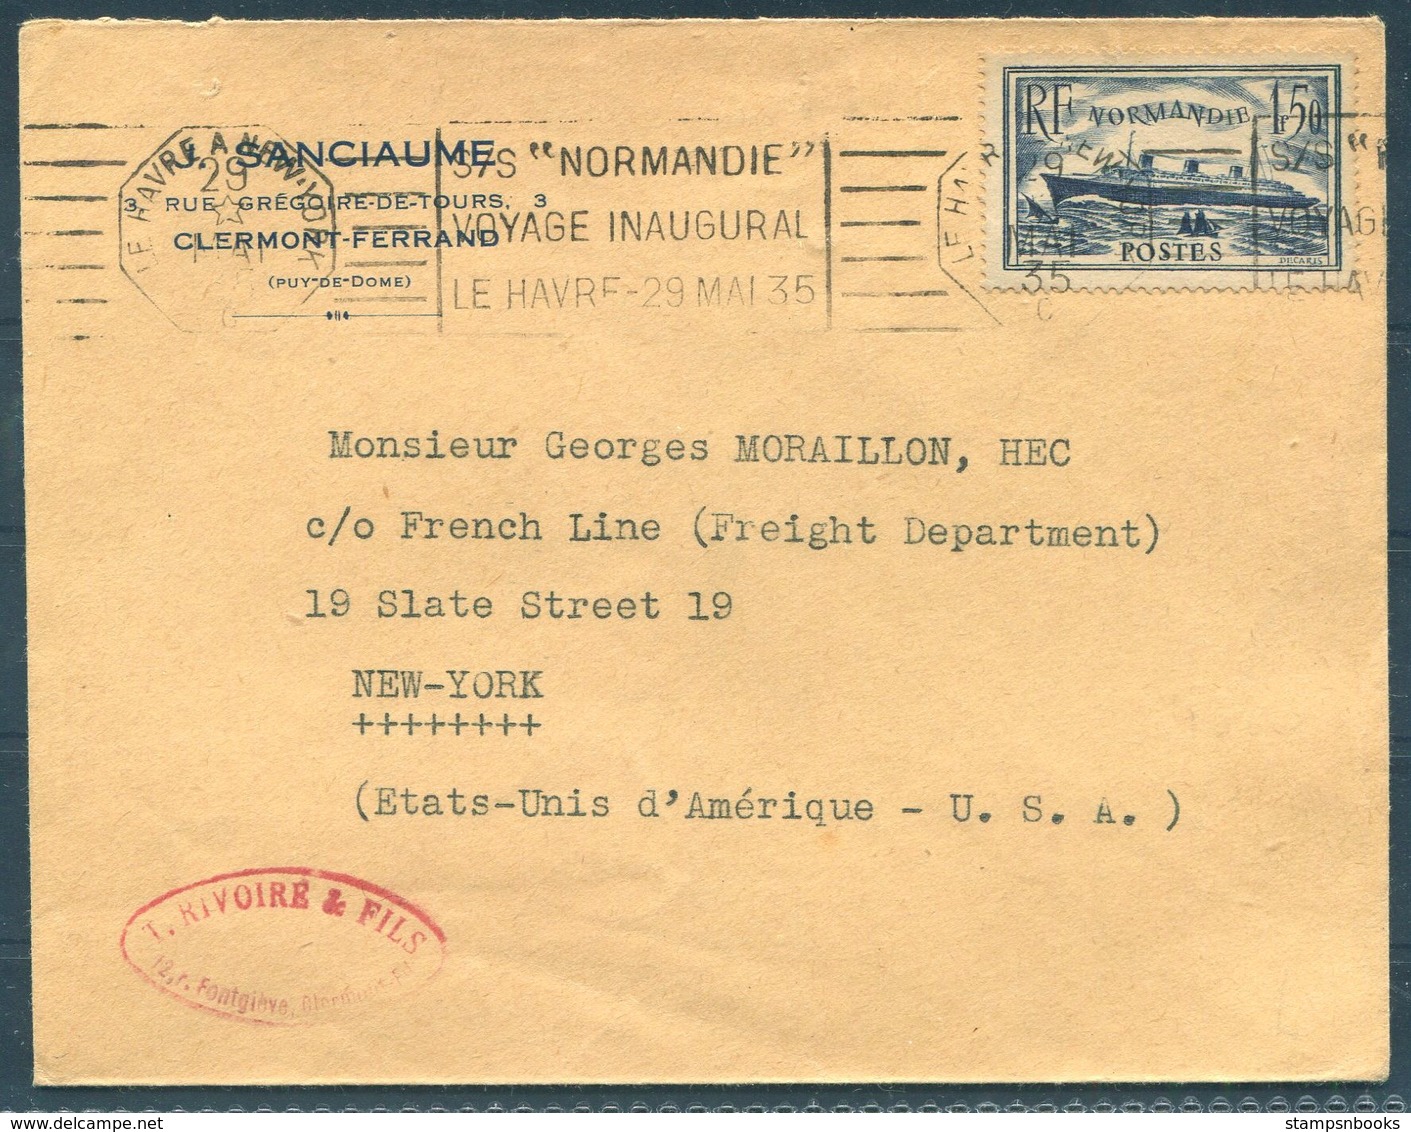 1935 France S/S NORMANDIE Maiden Voyage Le Havre - New York Ship Cover - Covers & Documents